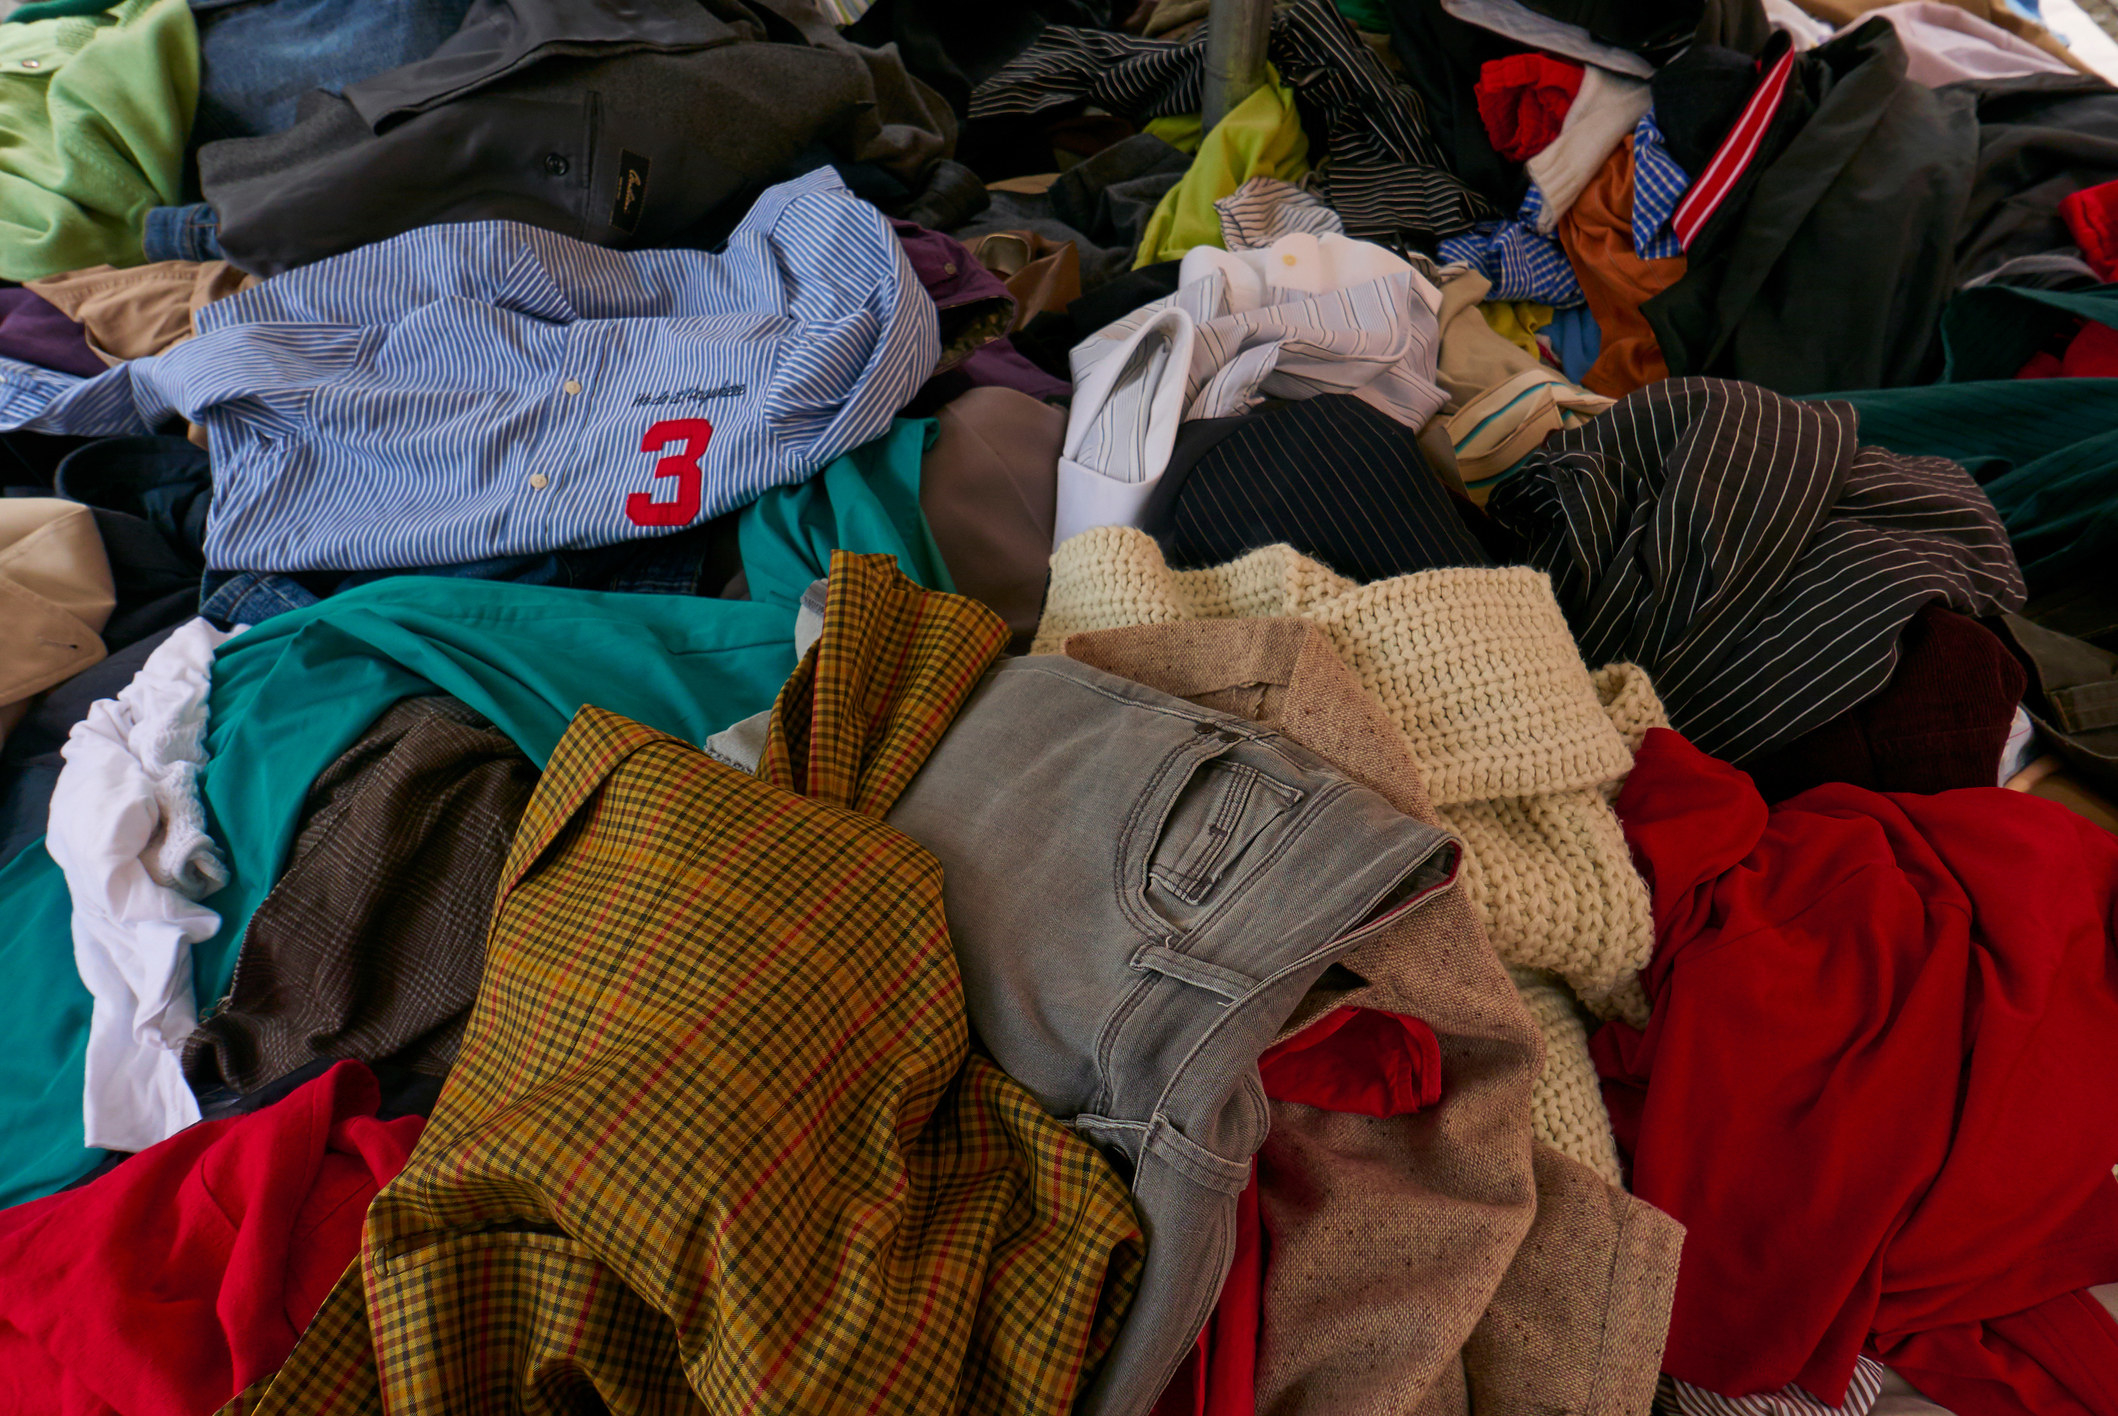 A messy pile of clothing.